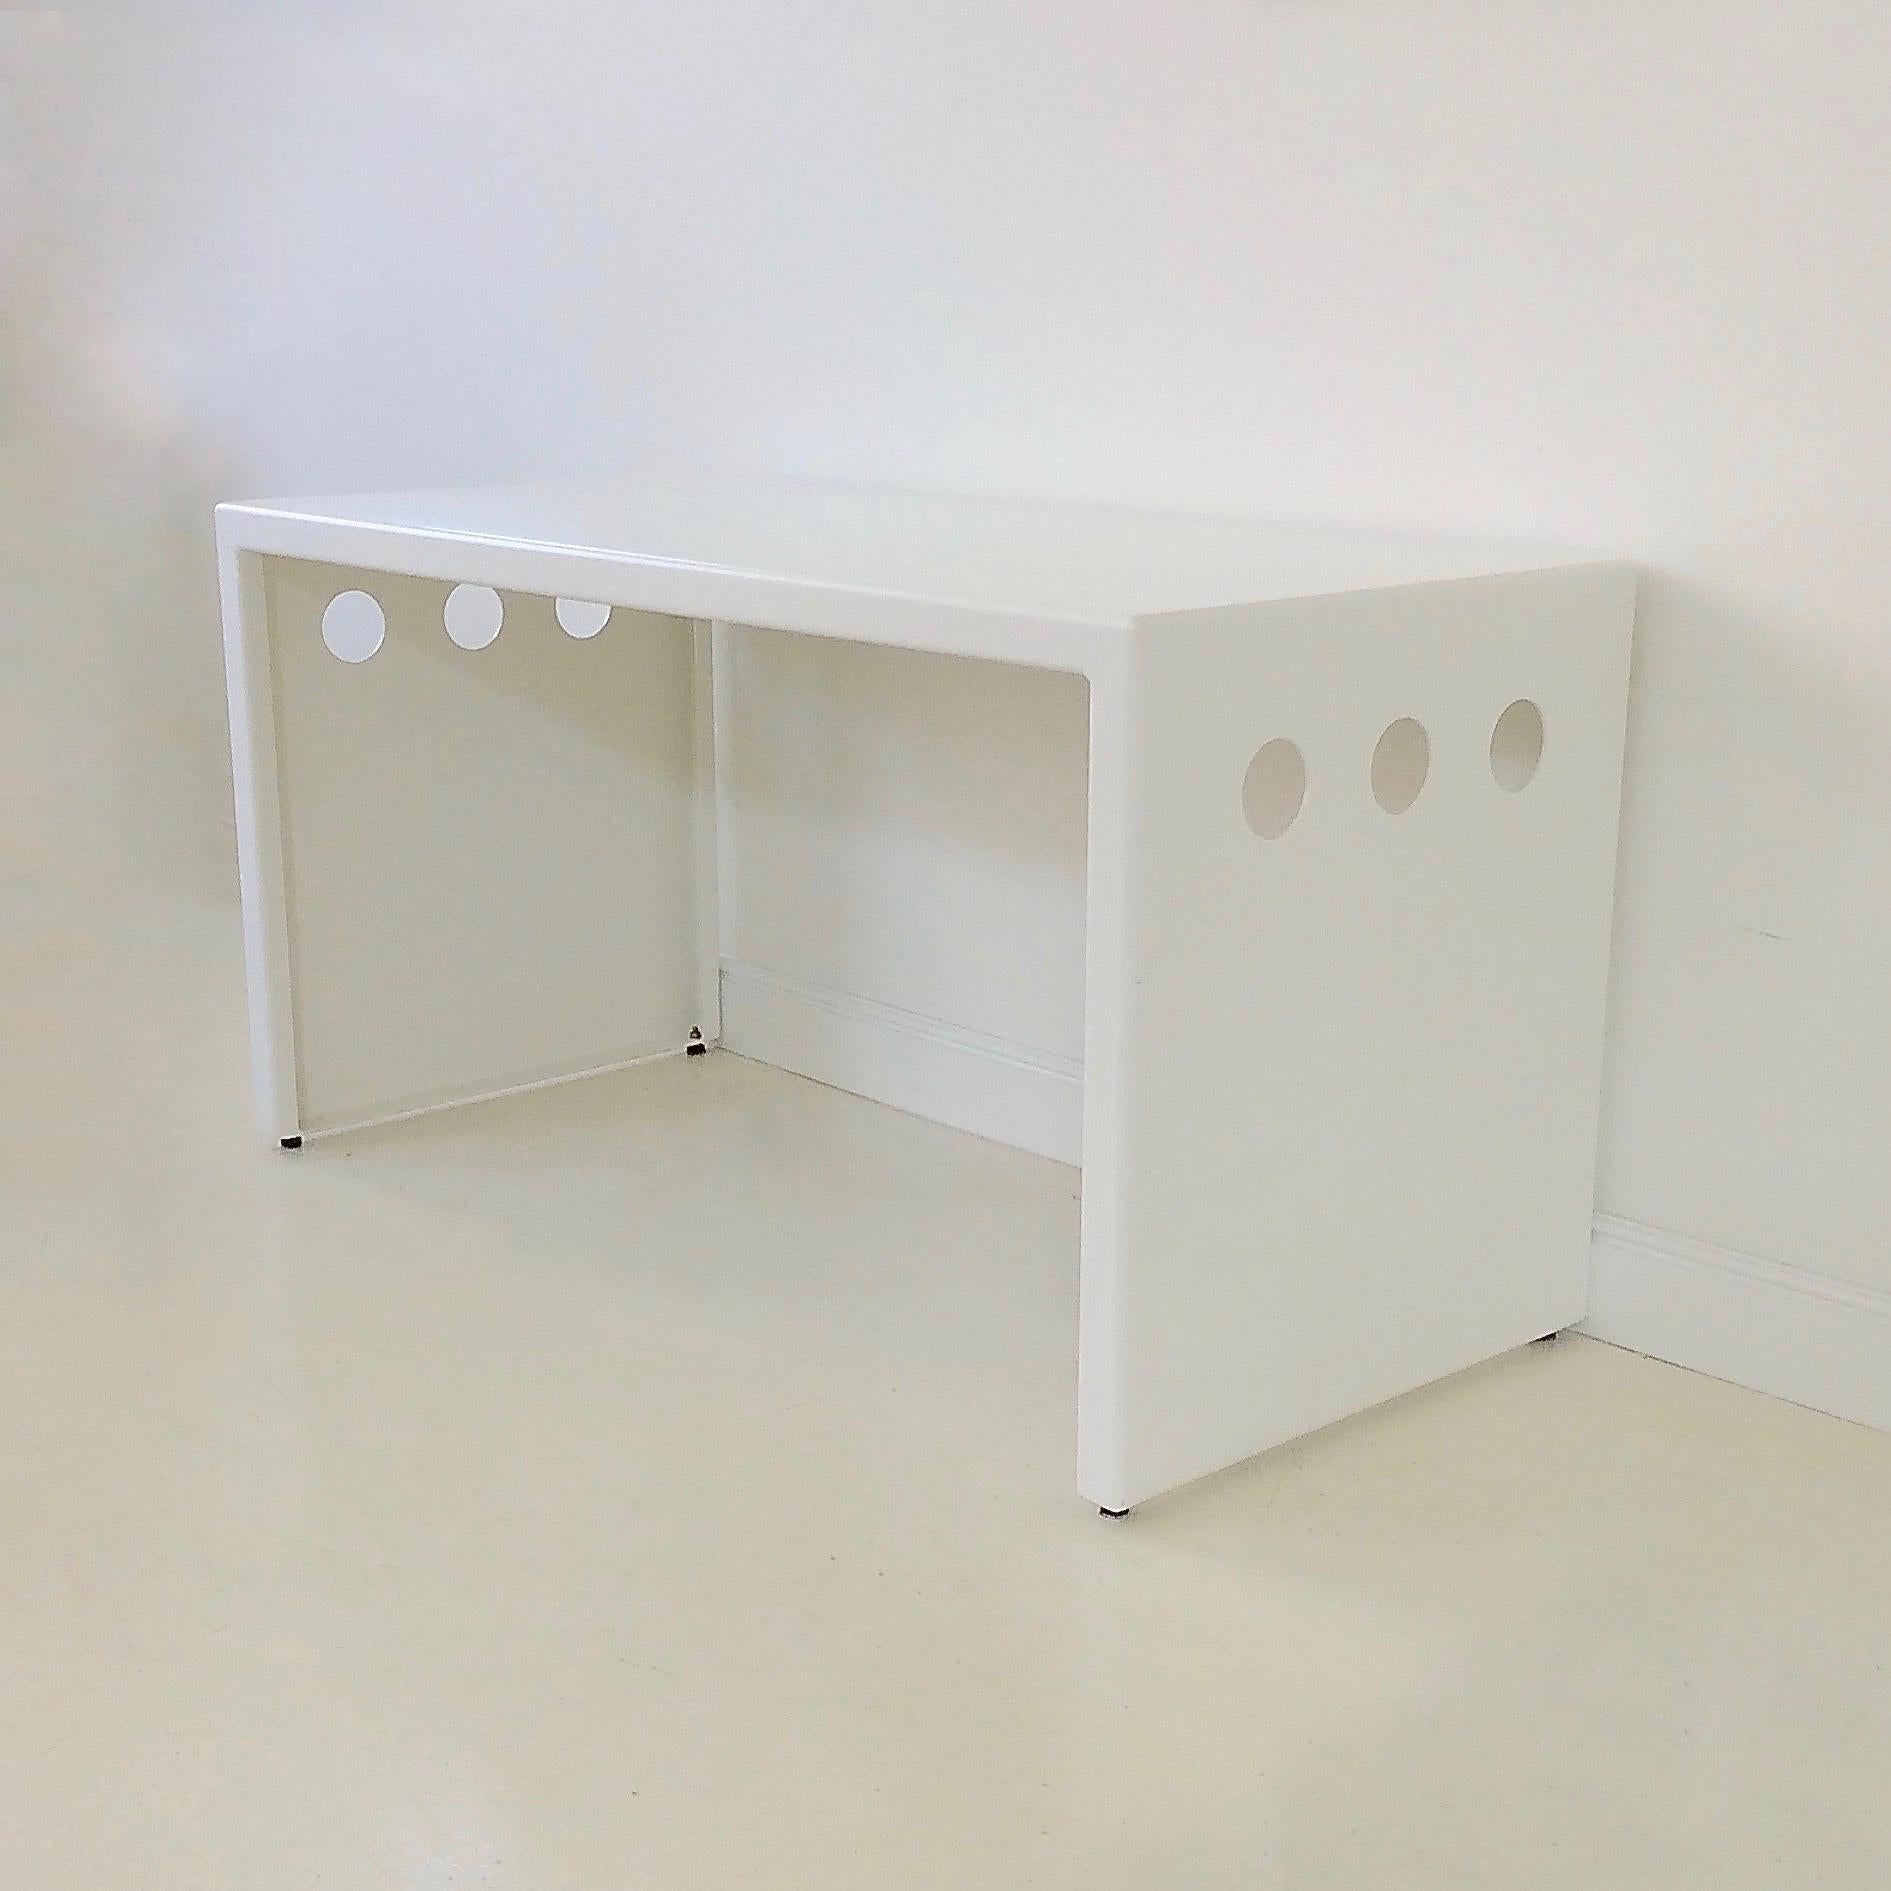 Elegant console/desk, circa 1980.
White lacquered perforated metal.
Dimensions: 140 cm W, 65 cm D, 74 cm H.
Good condition.
All purchases are covered by our Buyer Protection Guarantee.
This item can be returned within 7 days of delivery.
Please ask